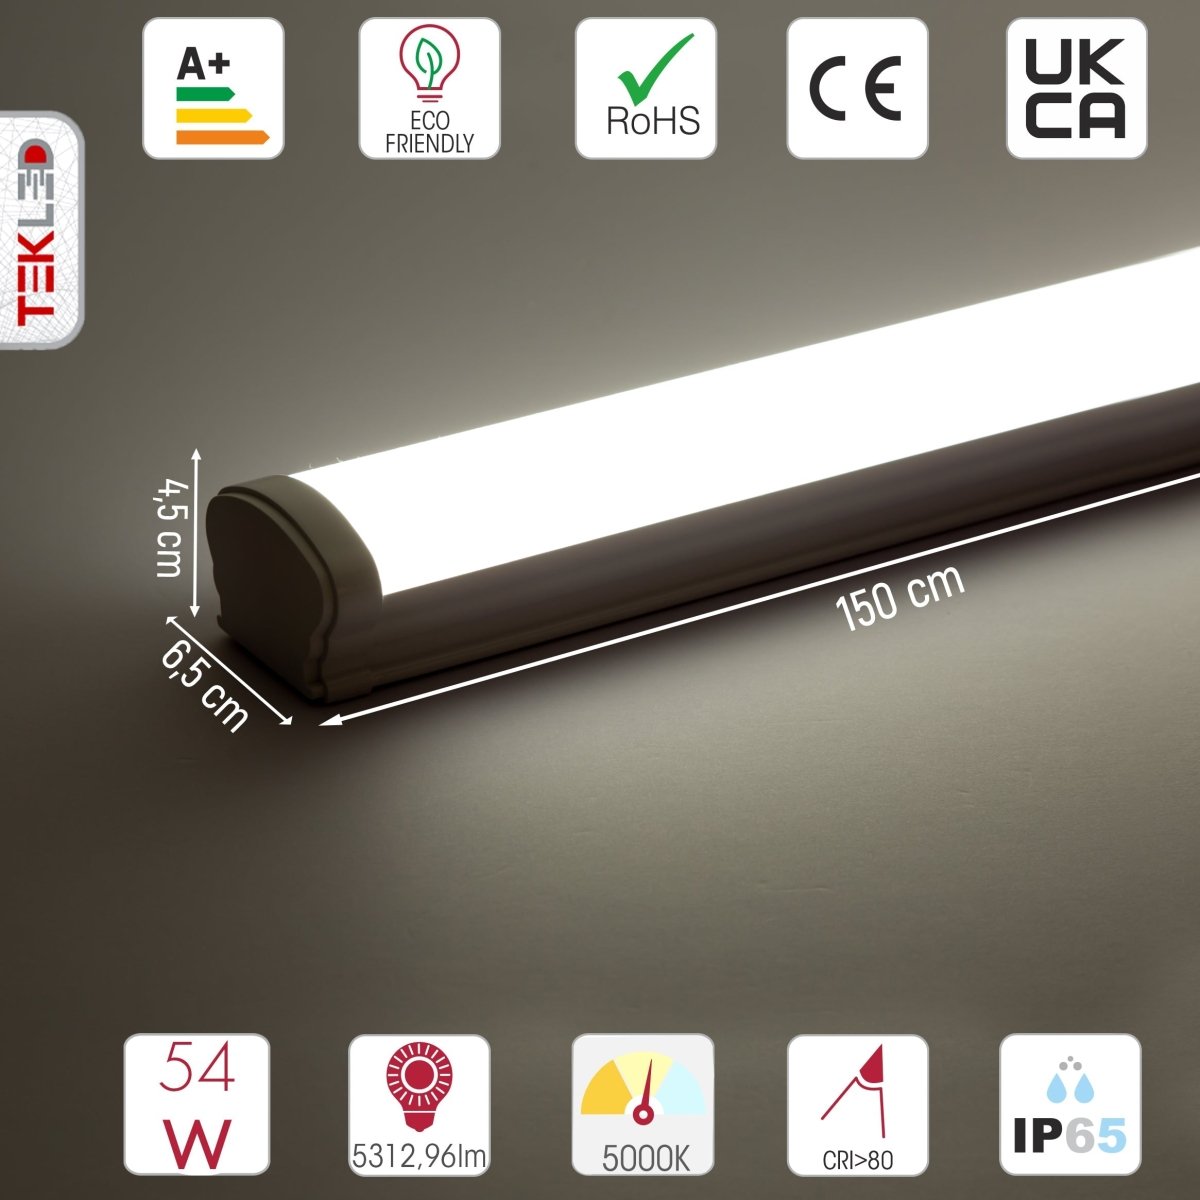 Technical specs and measurements for LED Tri-proof Batten Linear Fitting 54W 5000K Cool White IP65 150cm 5ft